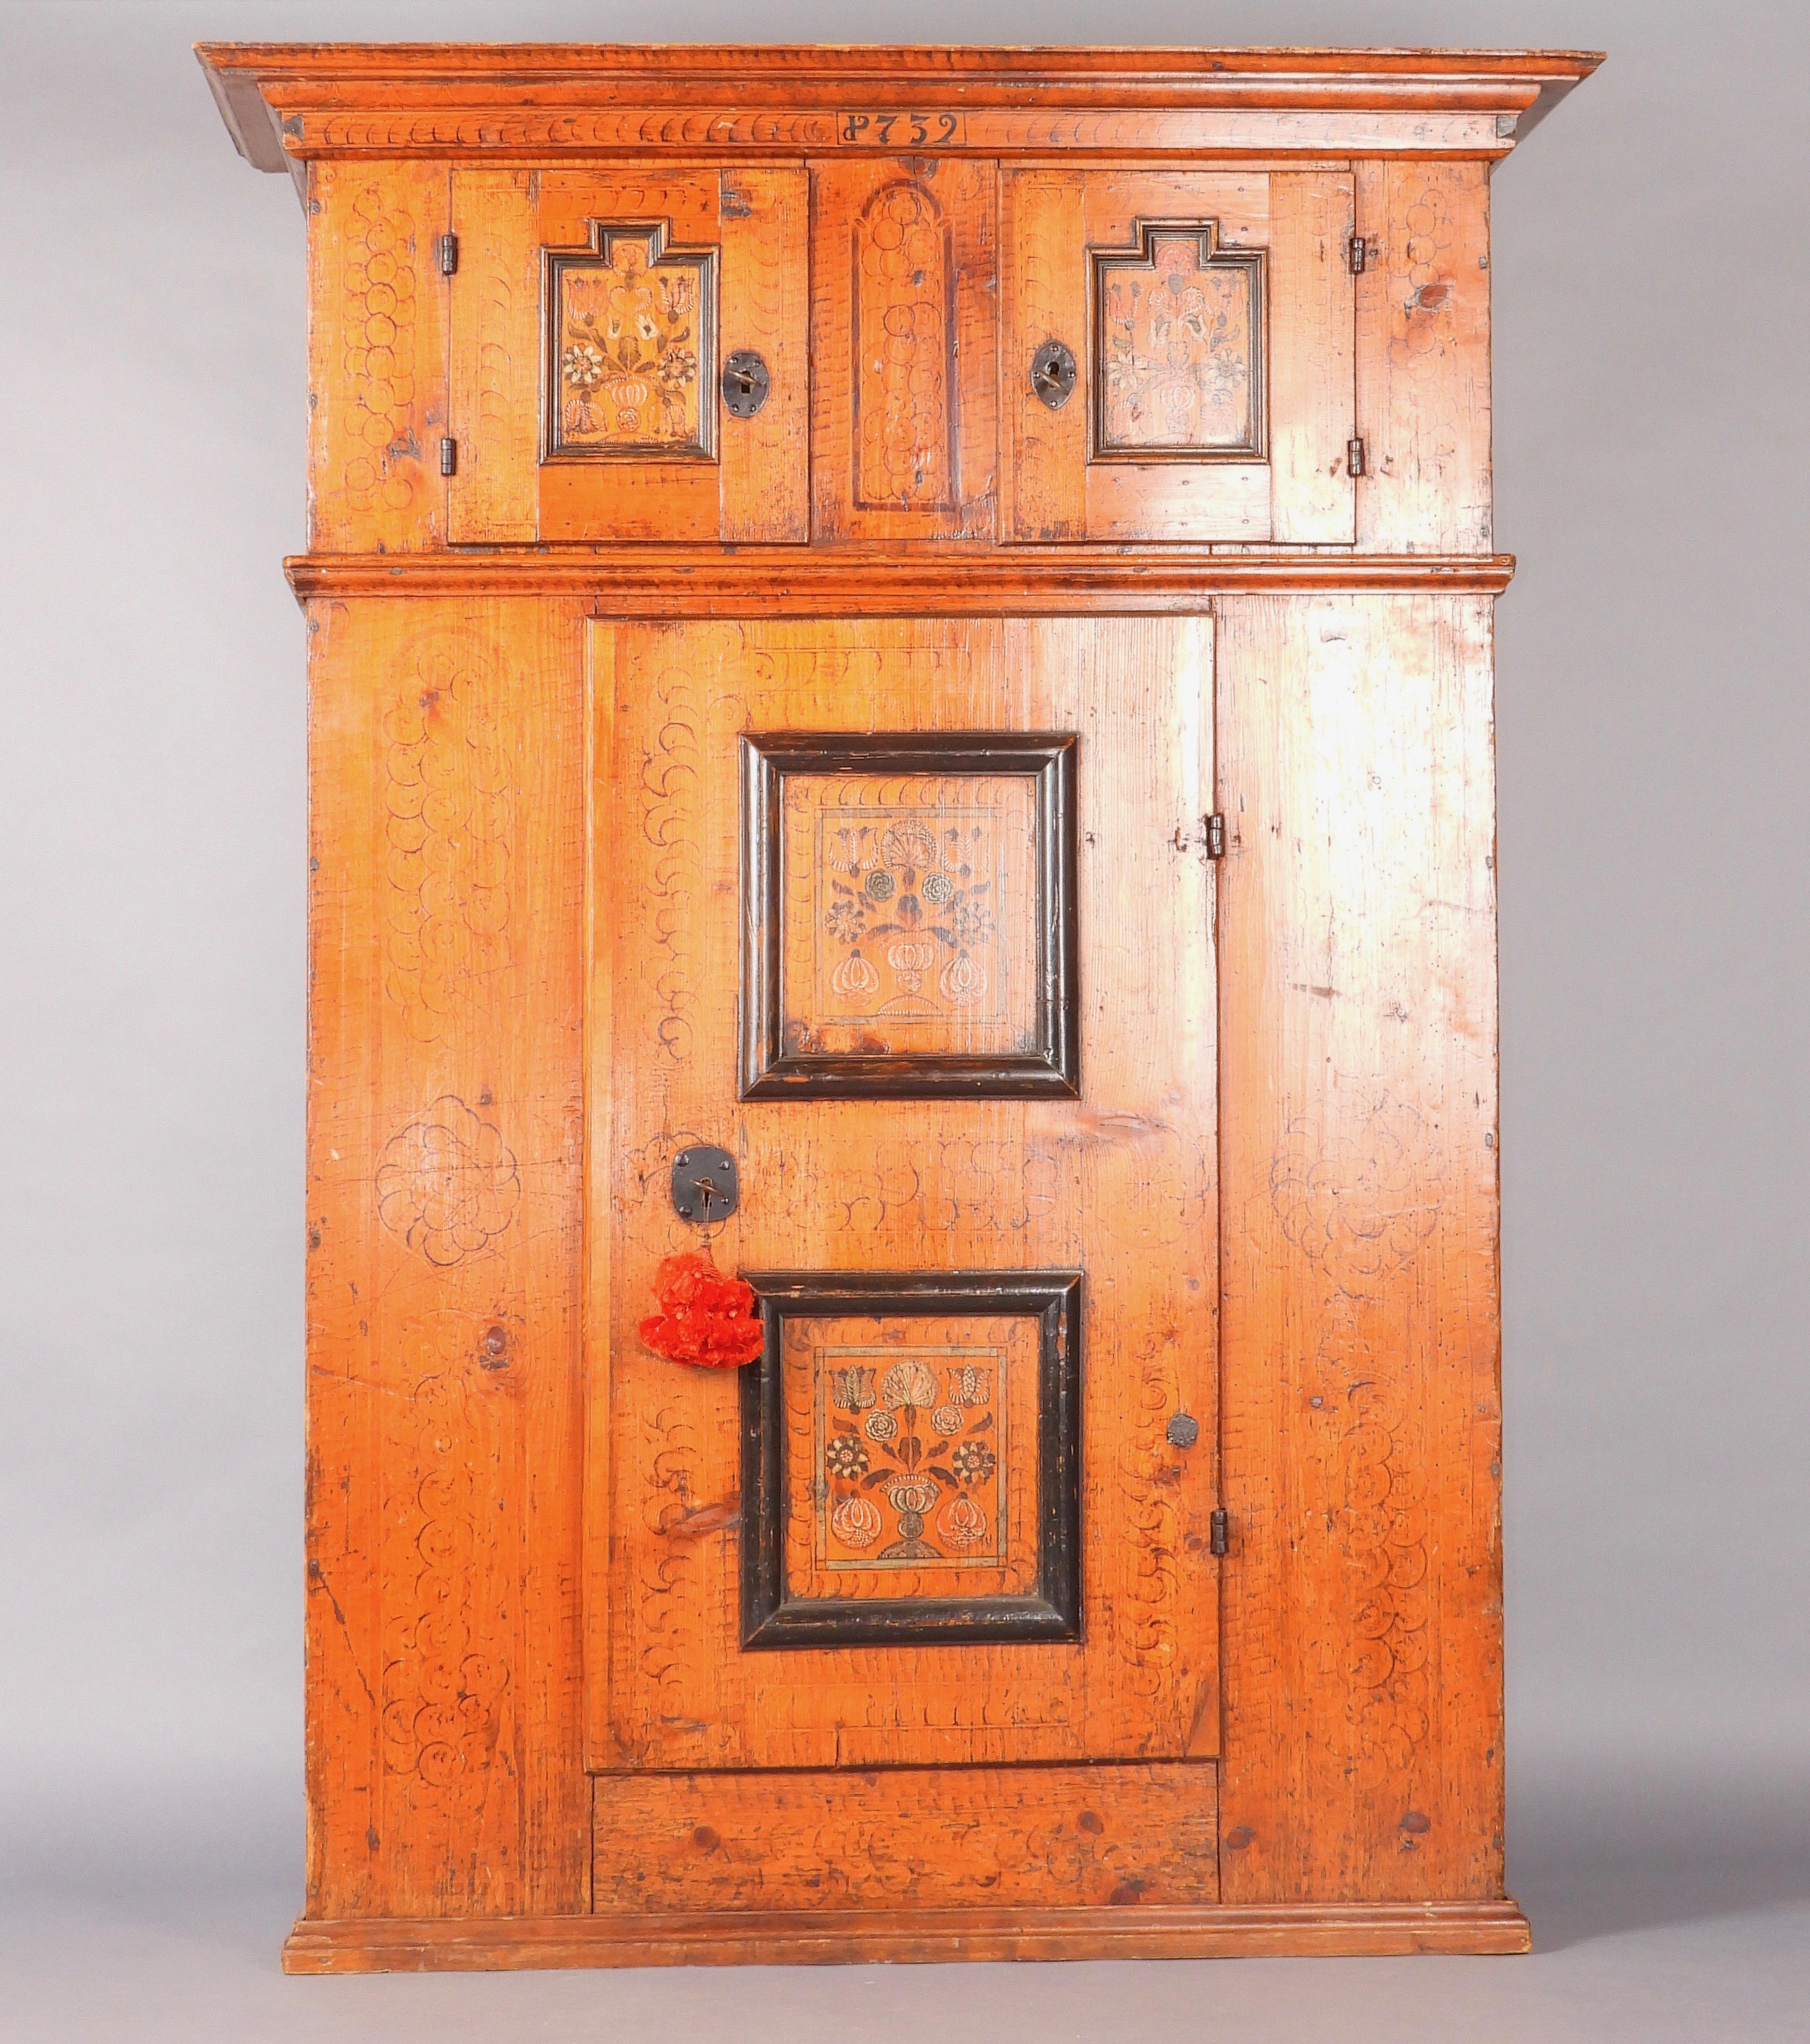 Swiss alp painted cupboard dated 1732 nice floral motif 